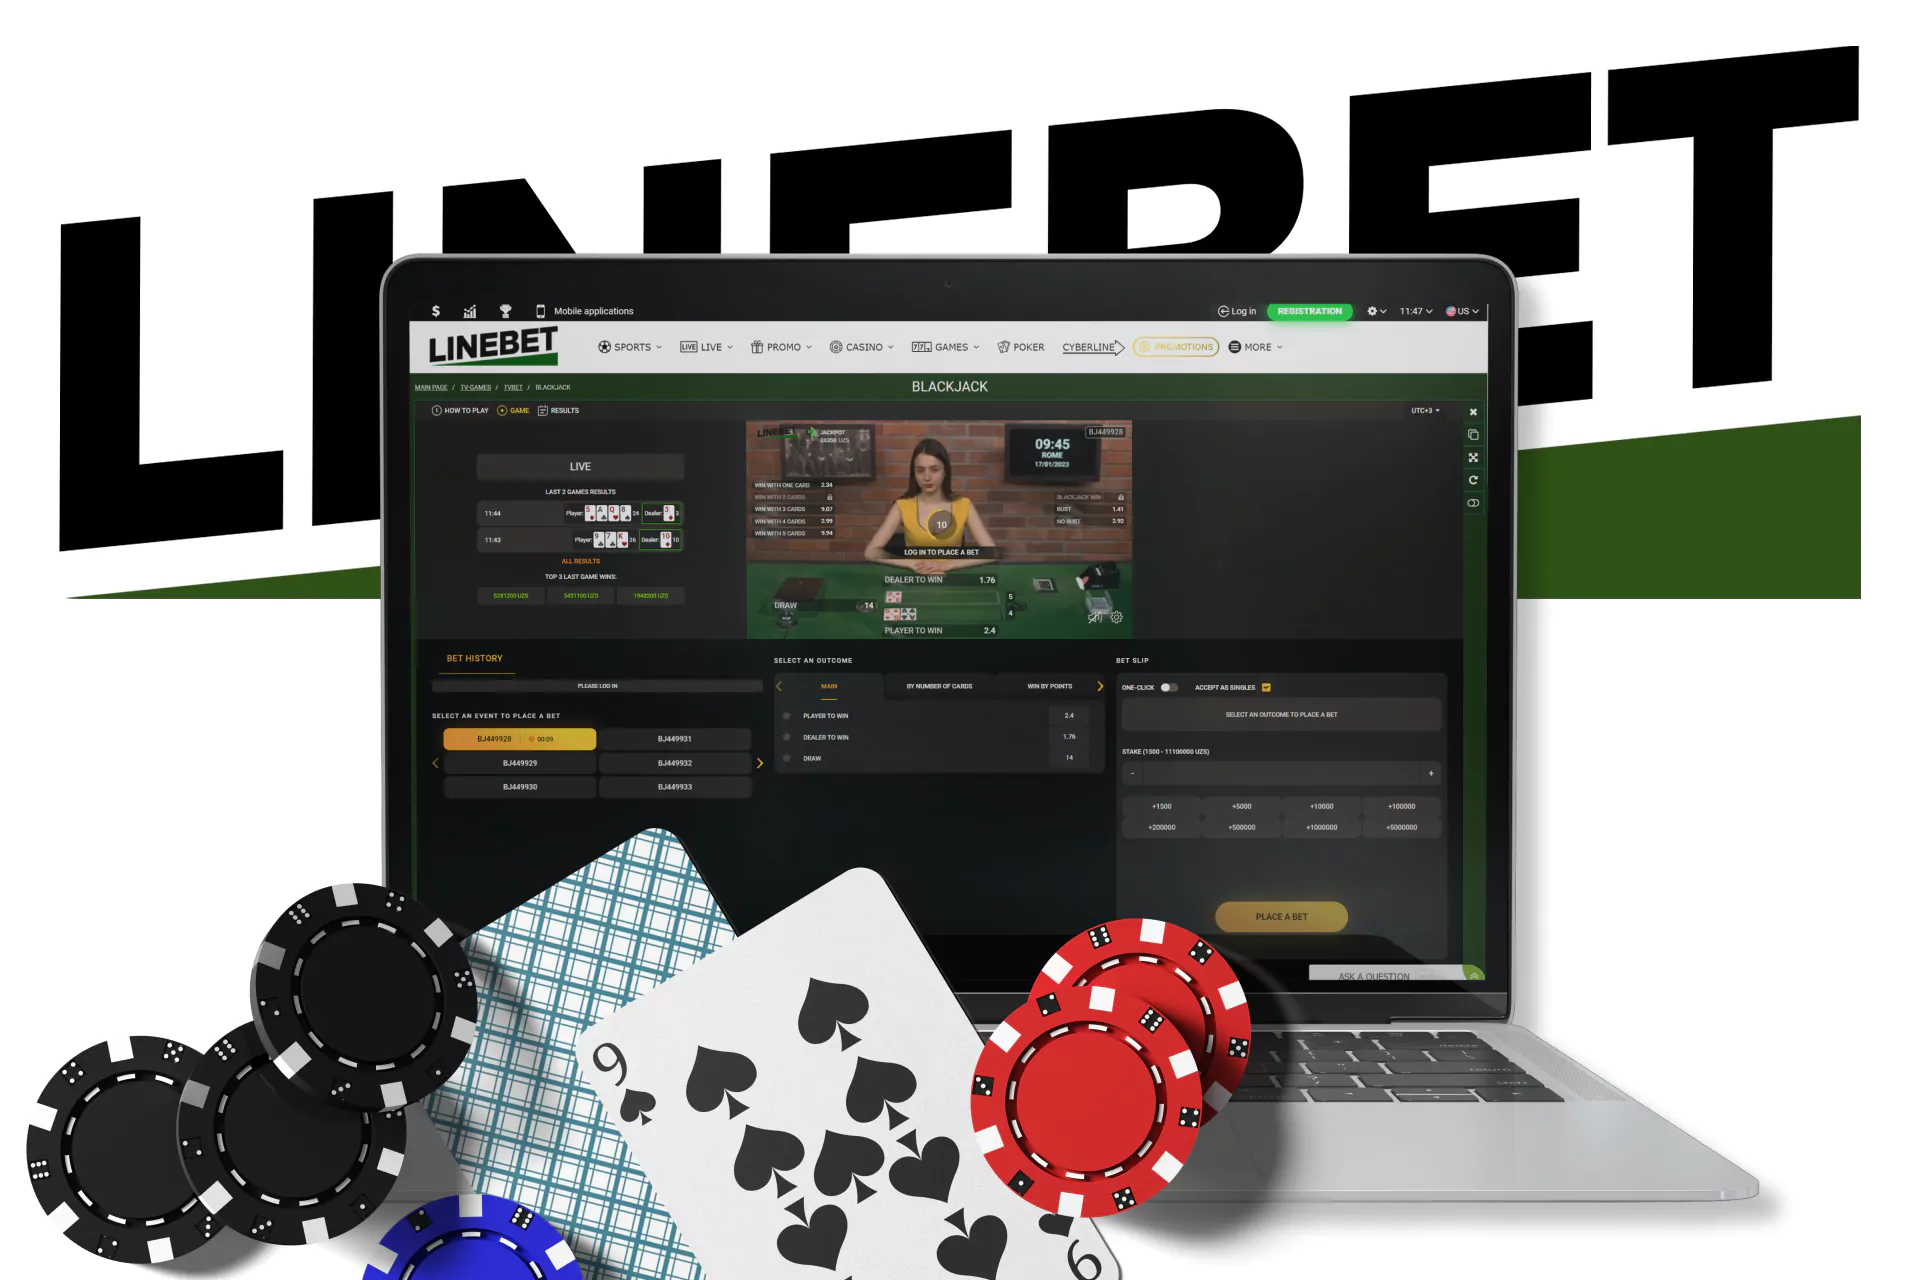 You can play blackjack at the Linebet Casino.